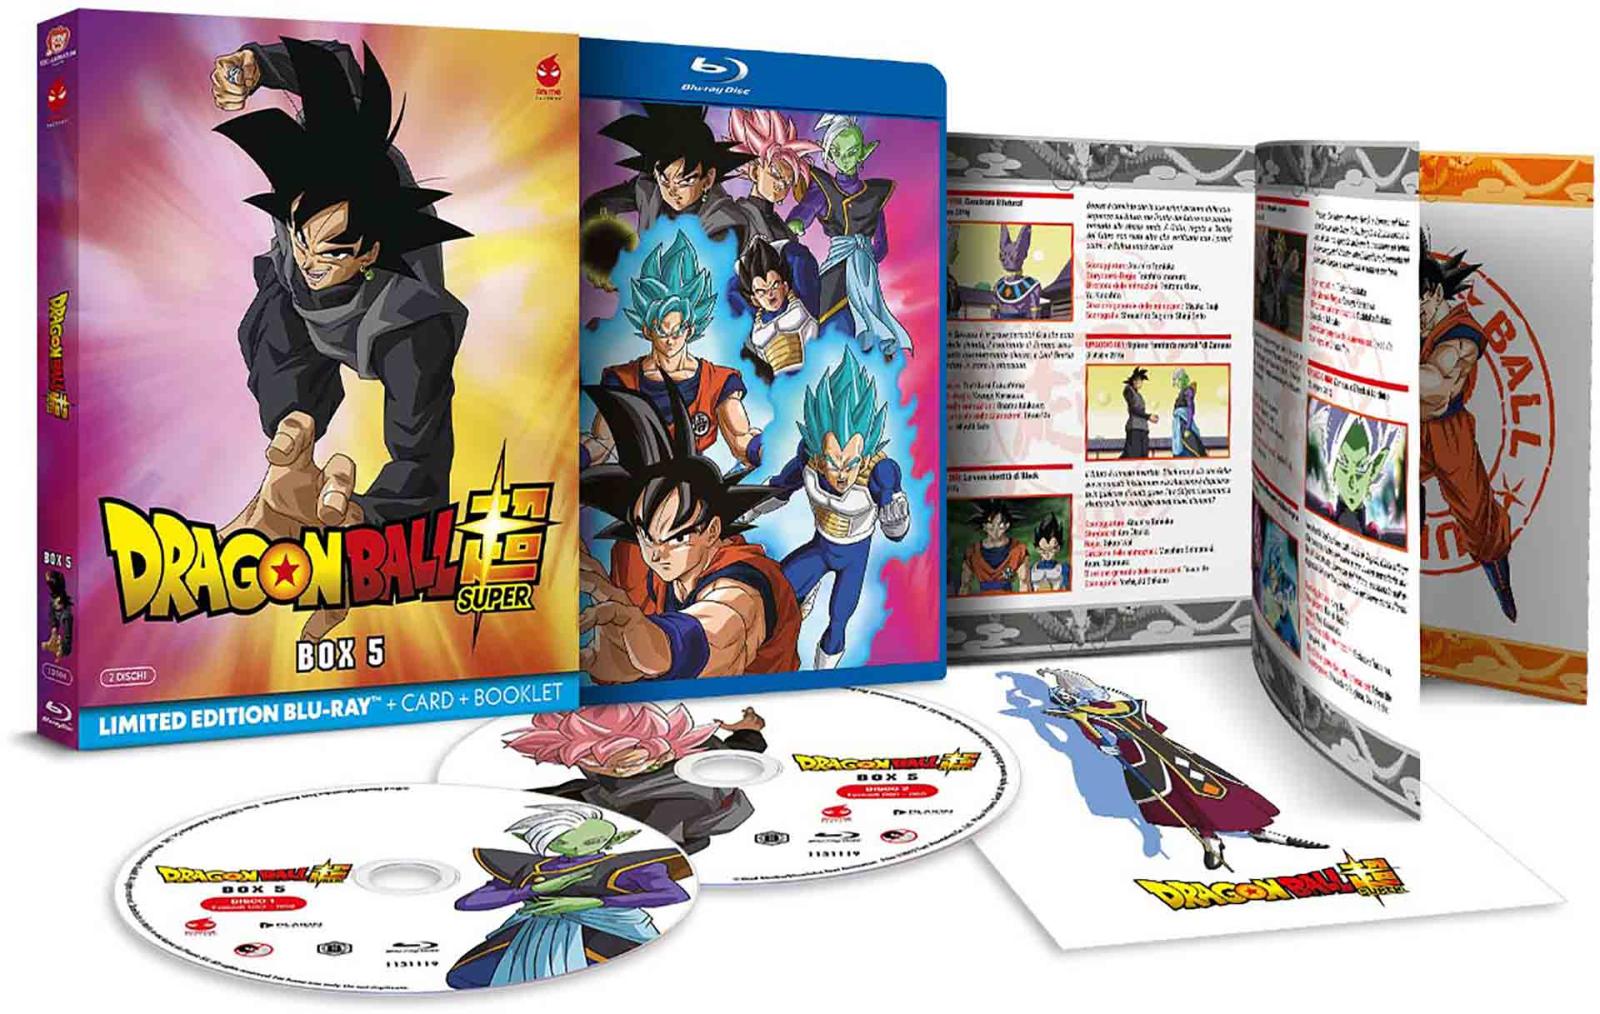 Dragon Ball Super - Volume 5 - Limited Edition 2 Blu-ray + Card + Booklet (Blu-ray) Image 2